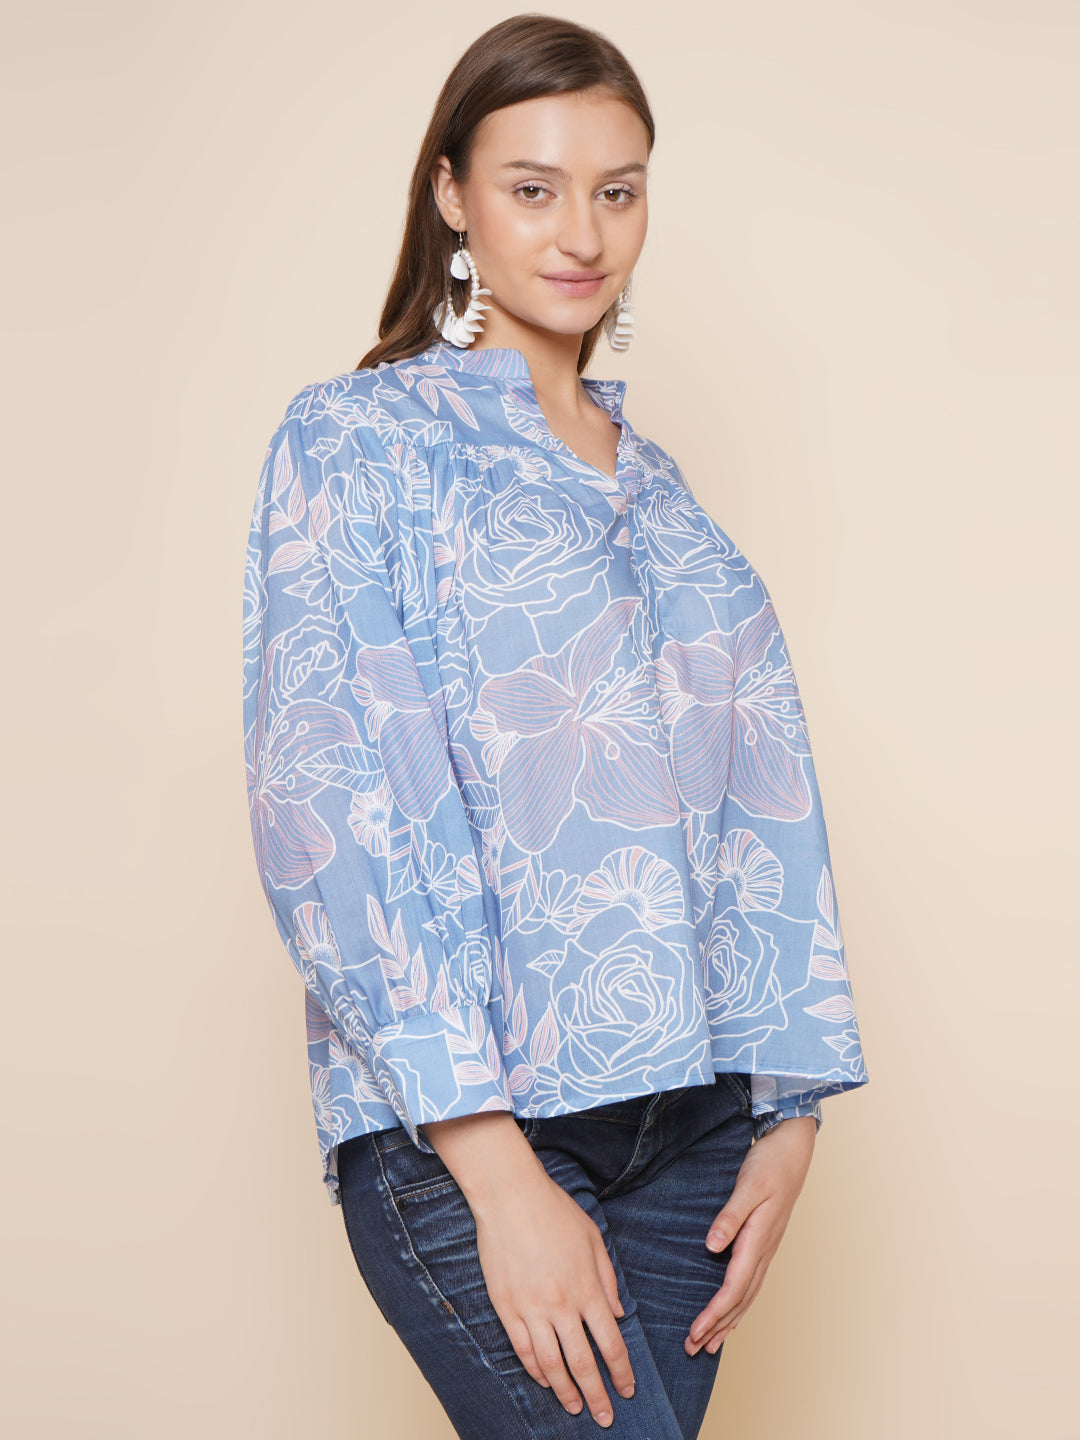 Bhama Couture Sky Blue Printed Top